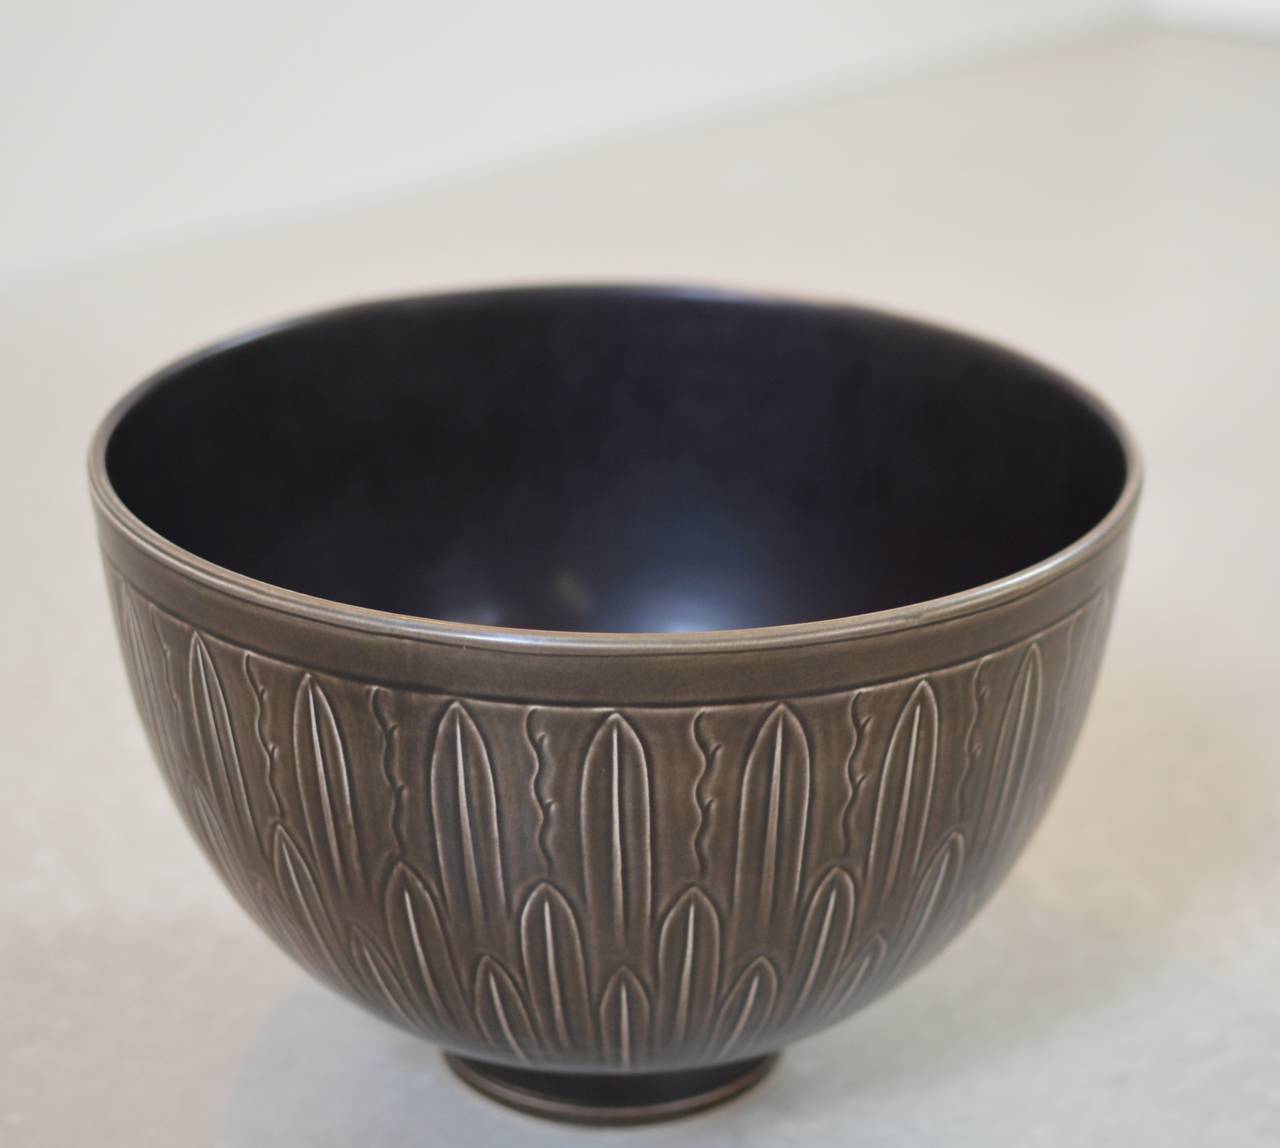 Rare large fruit bowl from the rarely seen 'Solbjerg' series, from Nils Johan Thorvald Thorsson (1898–1975) earlier work for Aluminia. A branch of Royal Copenhagen where he was appointed as Artistic Director.
Measures: Ø 28.5 x H 19.5 cm.
 